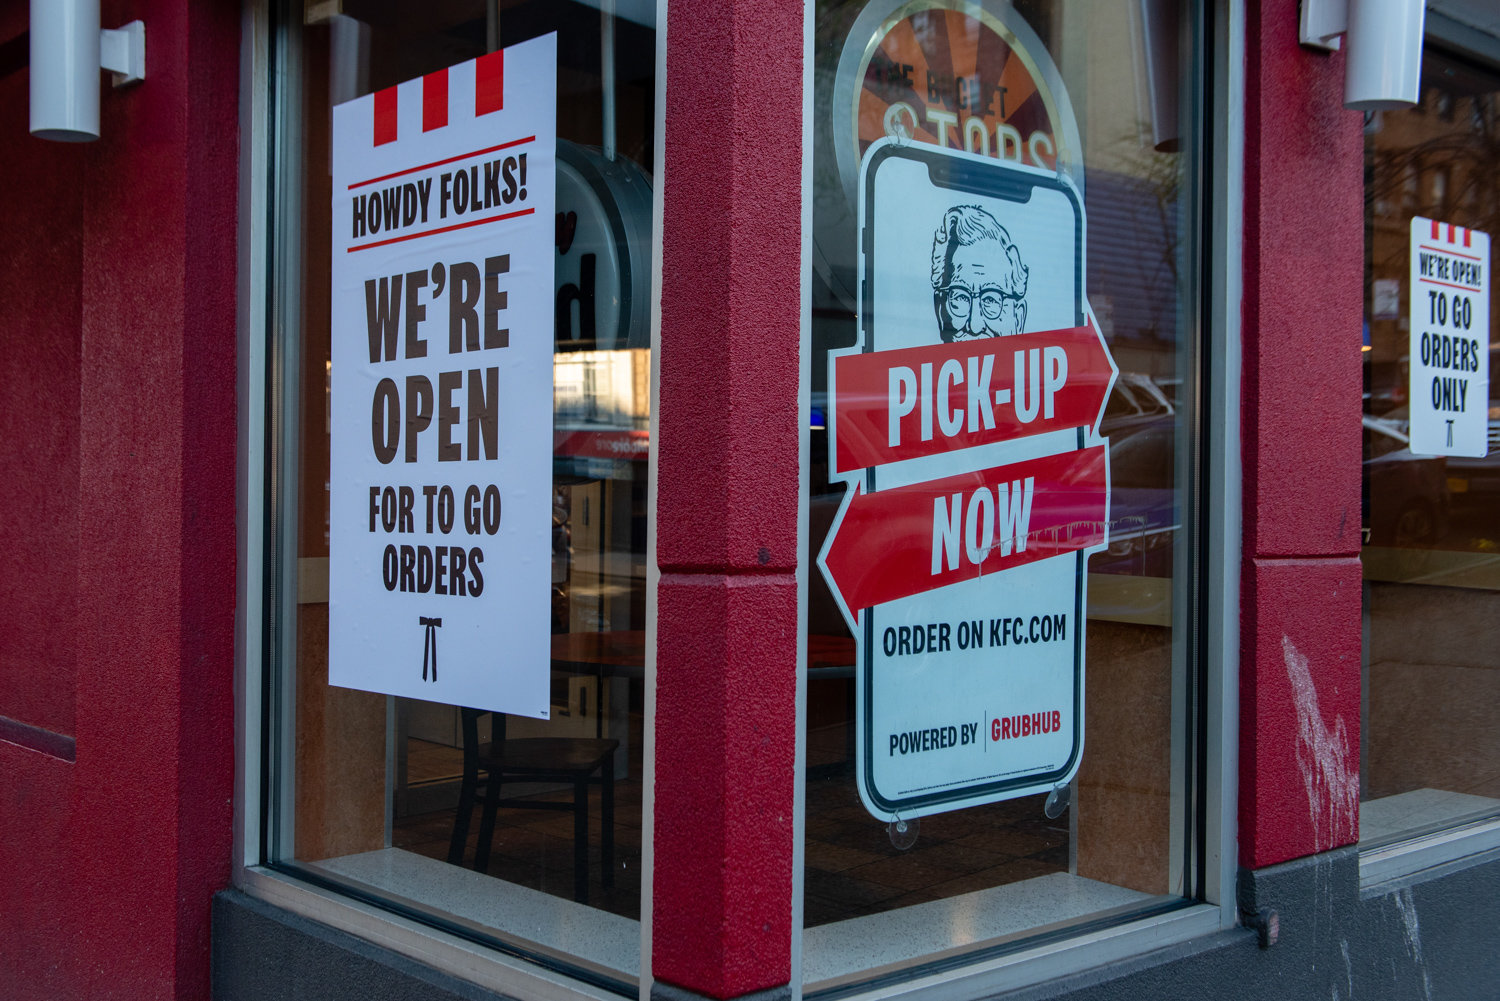 Signs inform passersby that the Kentucky Fried Chicken on Broadway is open for to-go orders. The partially closed business is a familiar sight in the weeks since the state’s shutdown in response to the coronavirus pandemic, which Frida Sternberg captured for her project documenting the new normal.